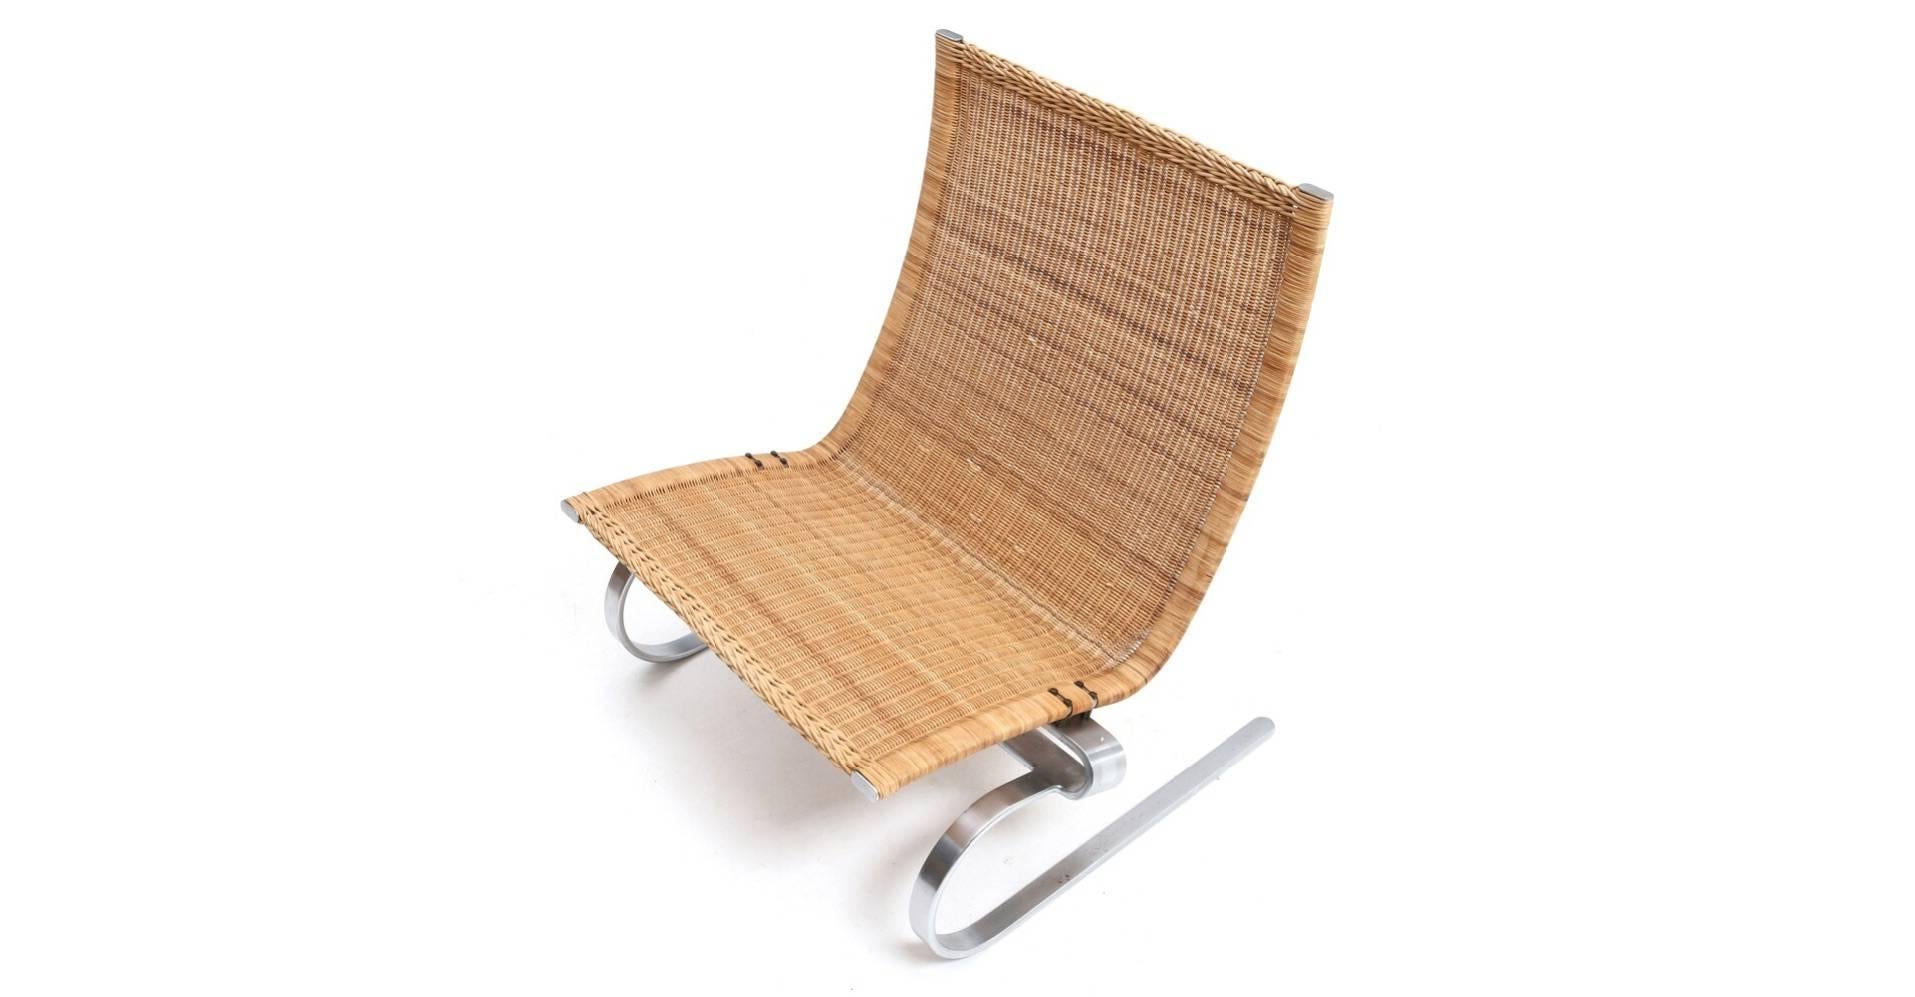 Mid-20th Century Poul Kjærholm “PK 20”, Easy Chair with Steel Frame, Woven Cane For Sale